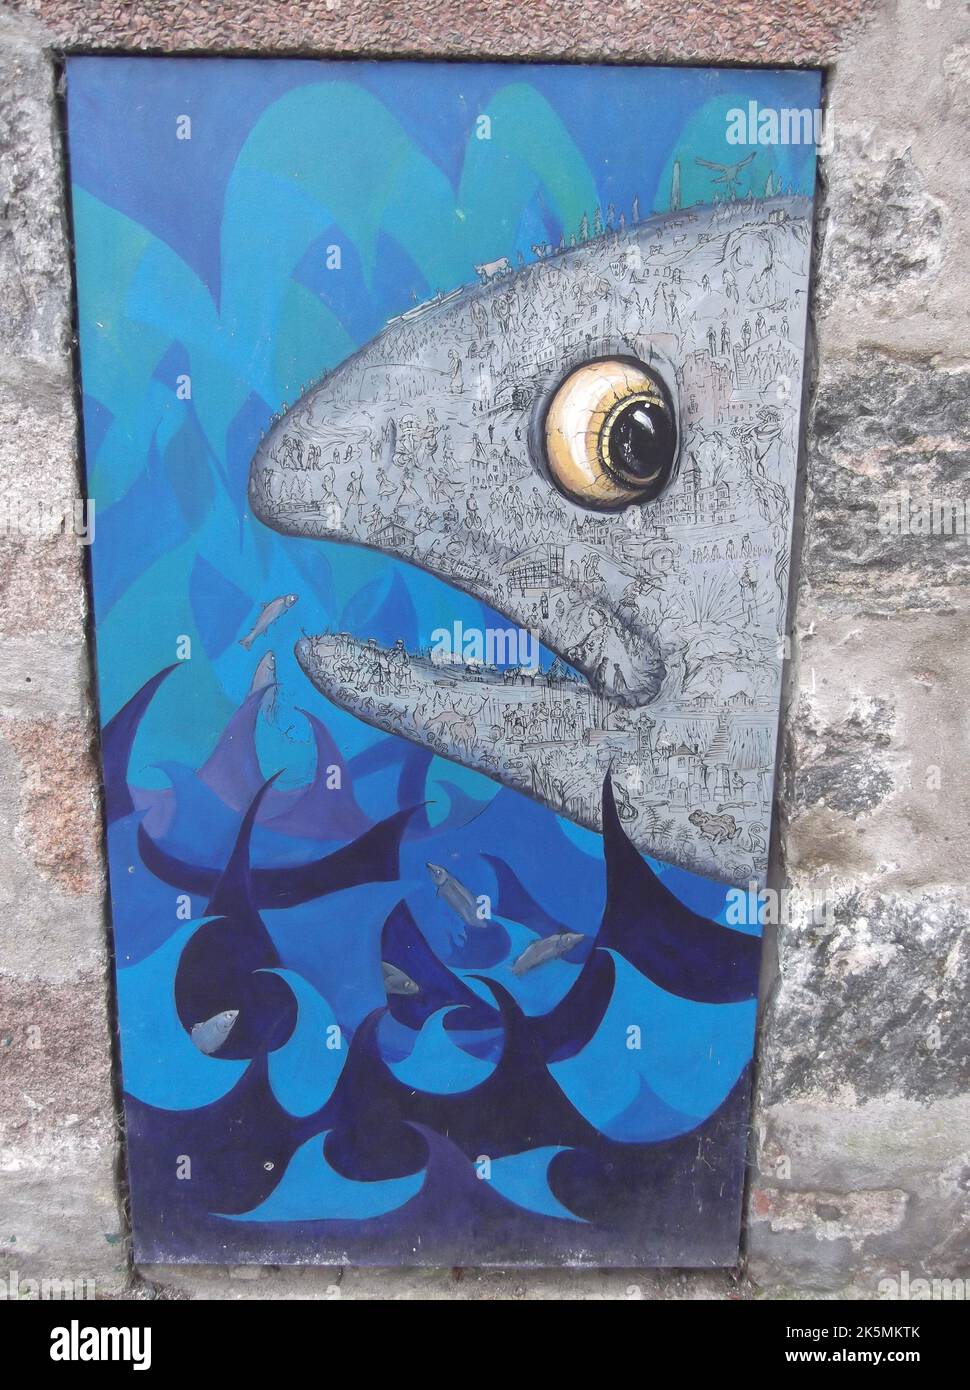 Banchory Bassline Murals. Mural within a painting of a fish head by  Shona Macdonald in Banchory, Scotland, 09-10-2022 Stock Photo